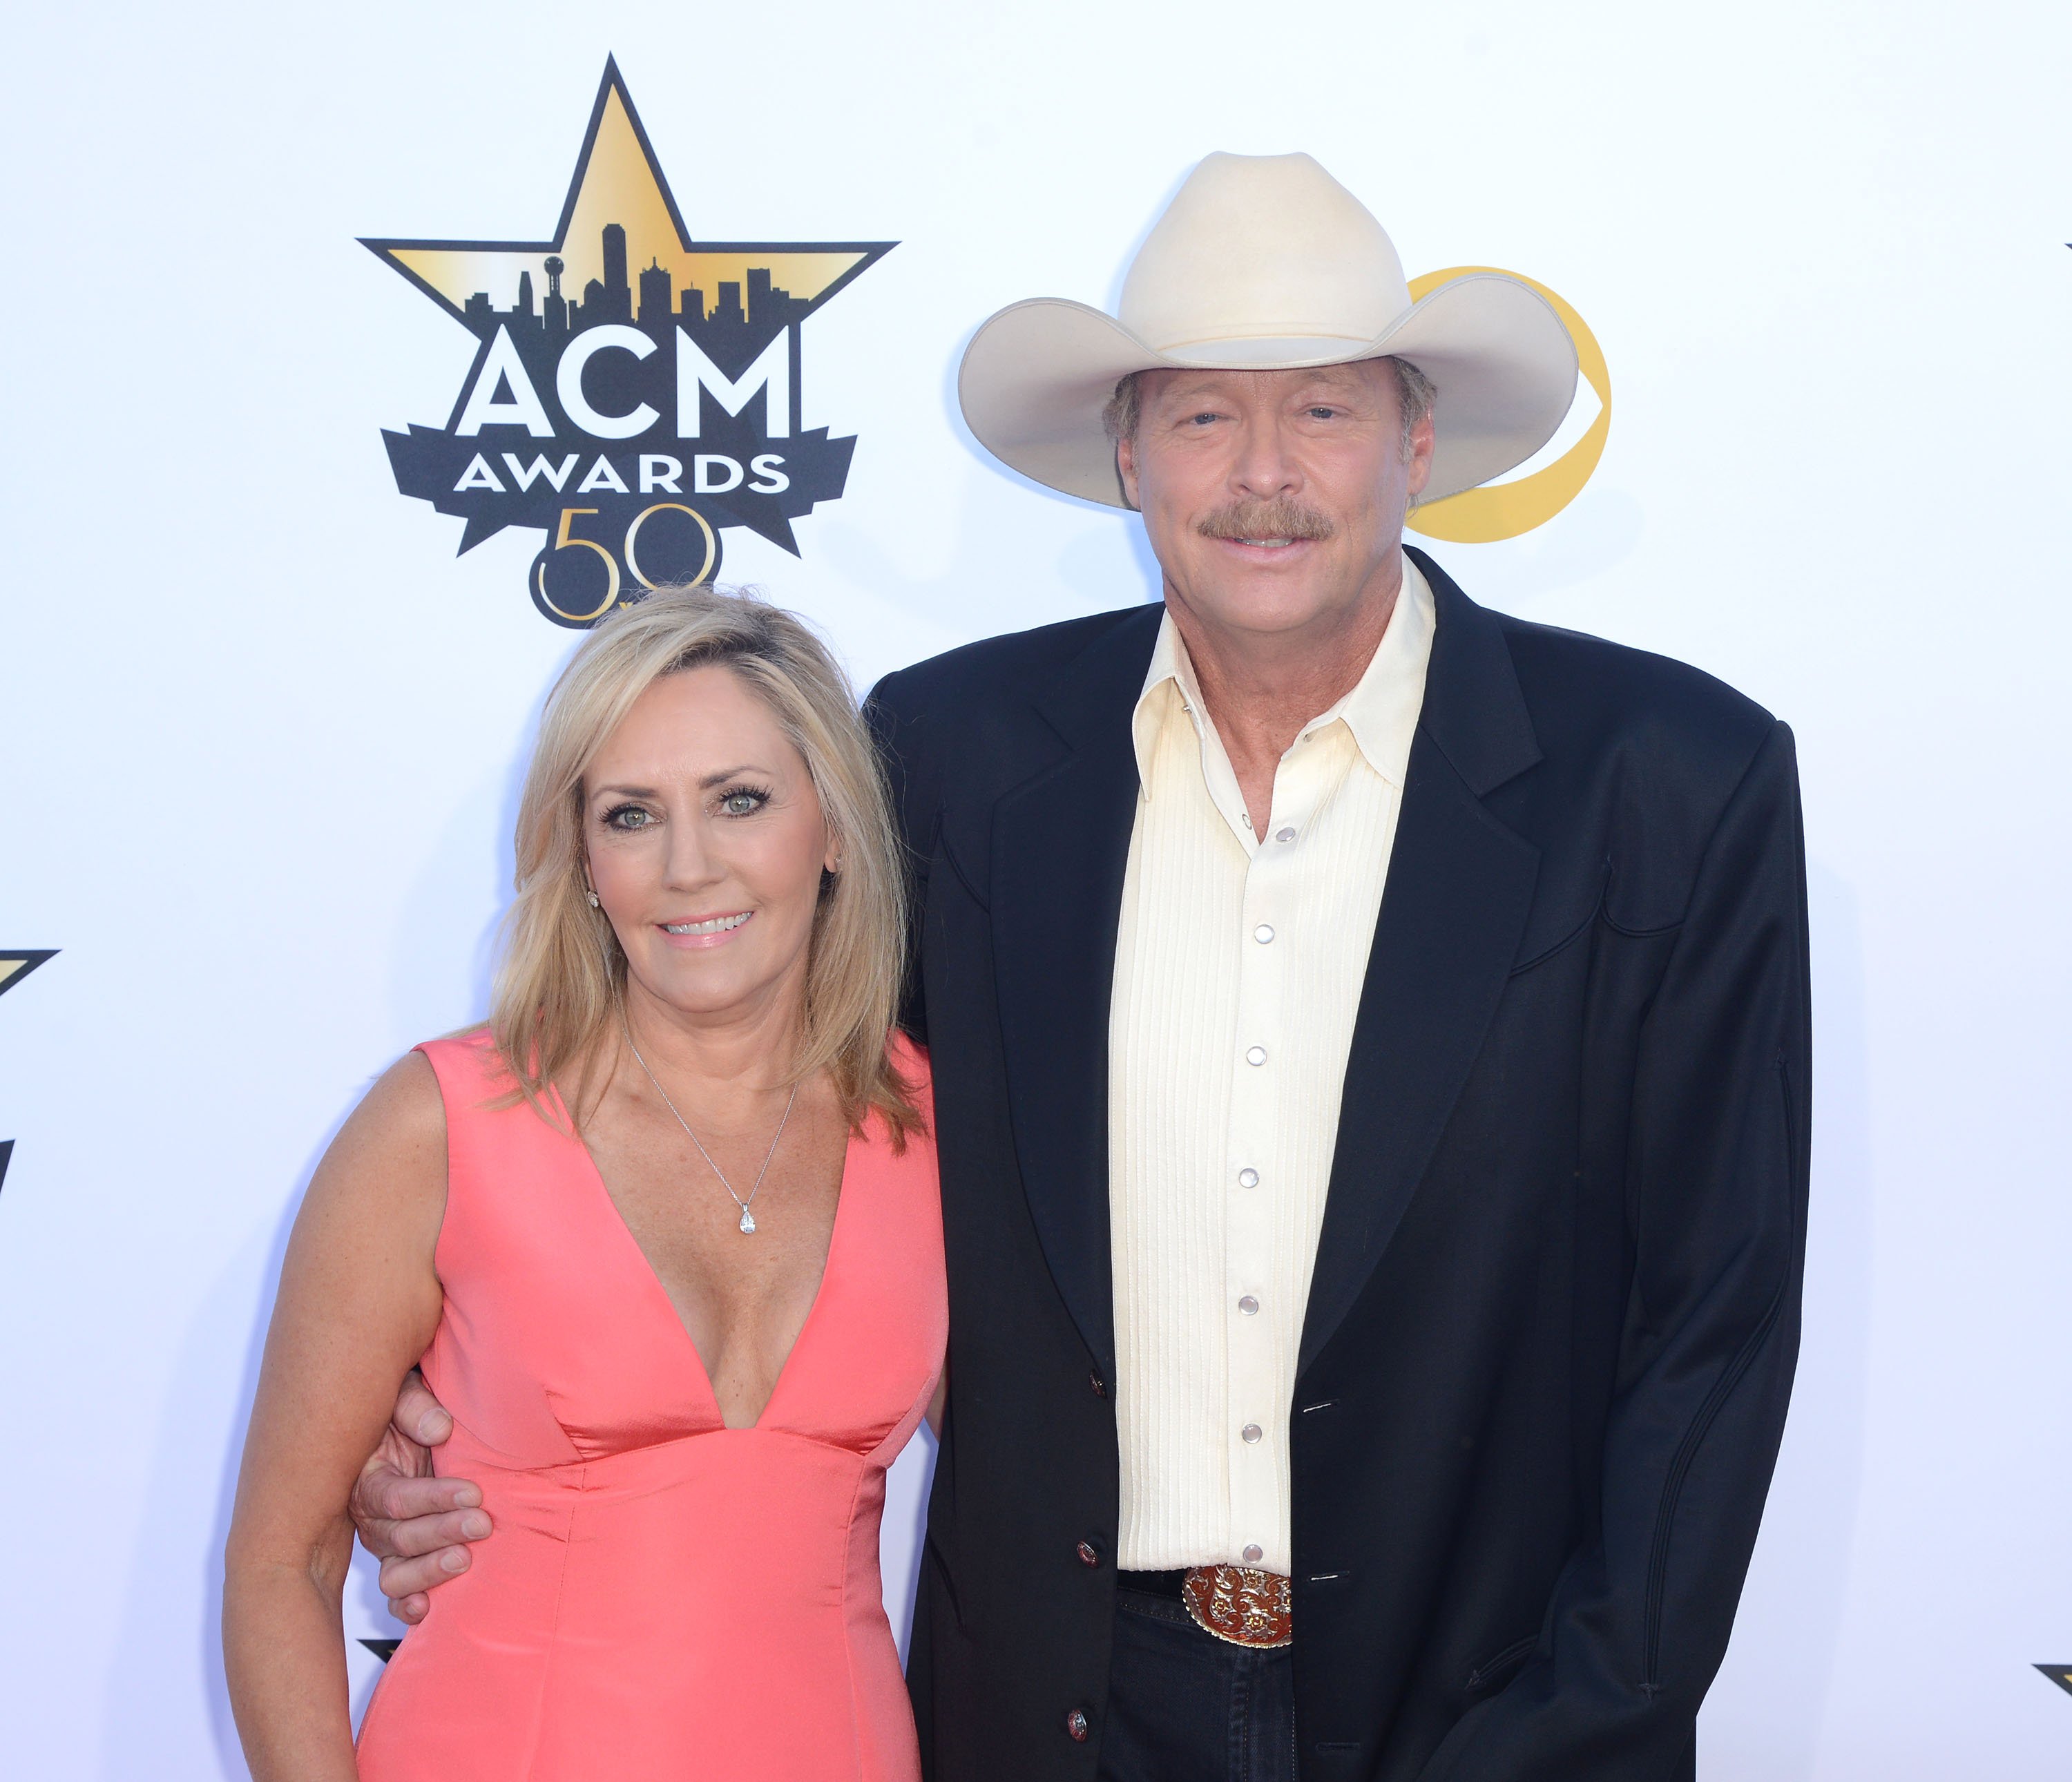 Denise Jackson (L) and singer Alan Jackson attend the 50th Academy Of Country Music Awards at AT&T Stadium on April 19, 2015 in Arlington, Texas | Source: Getty Images 